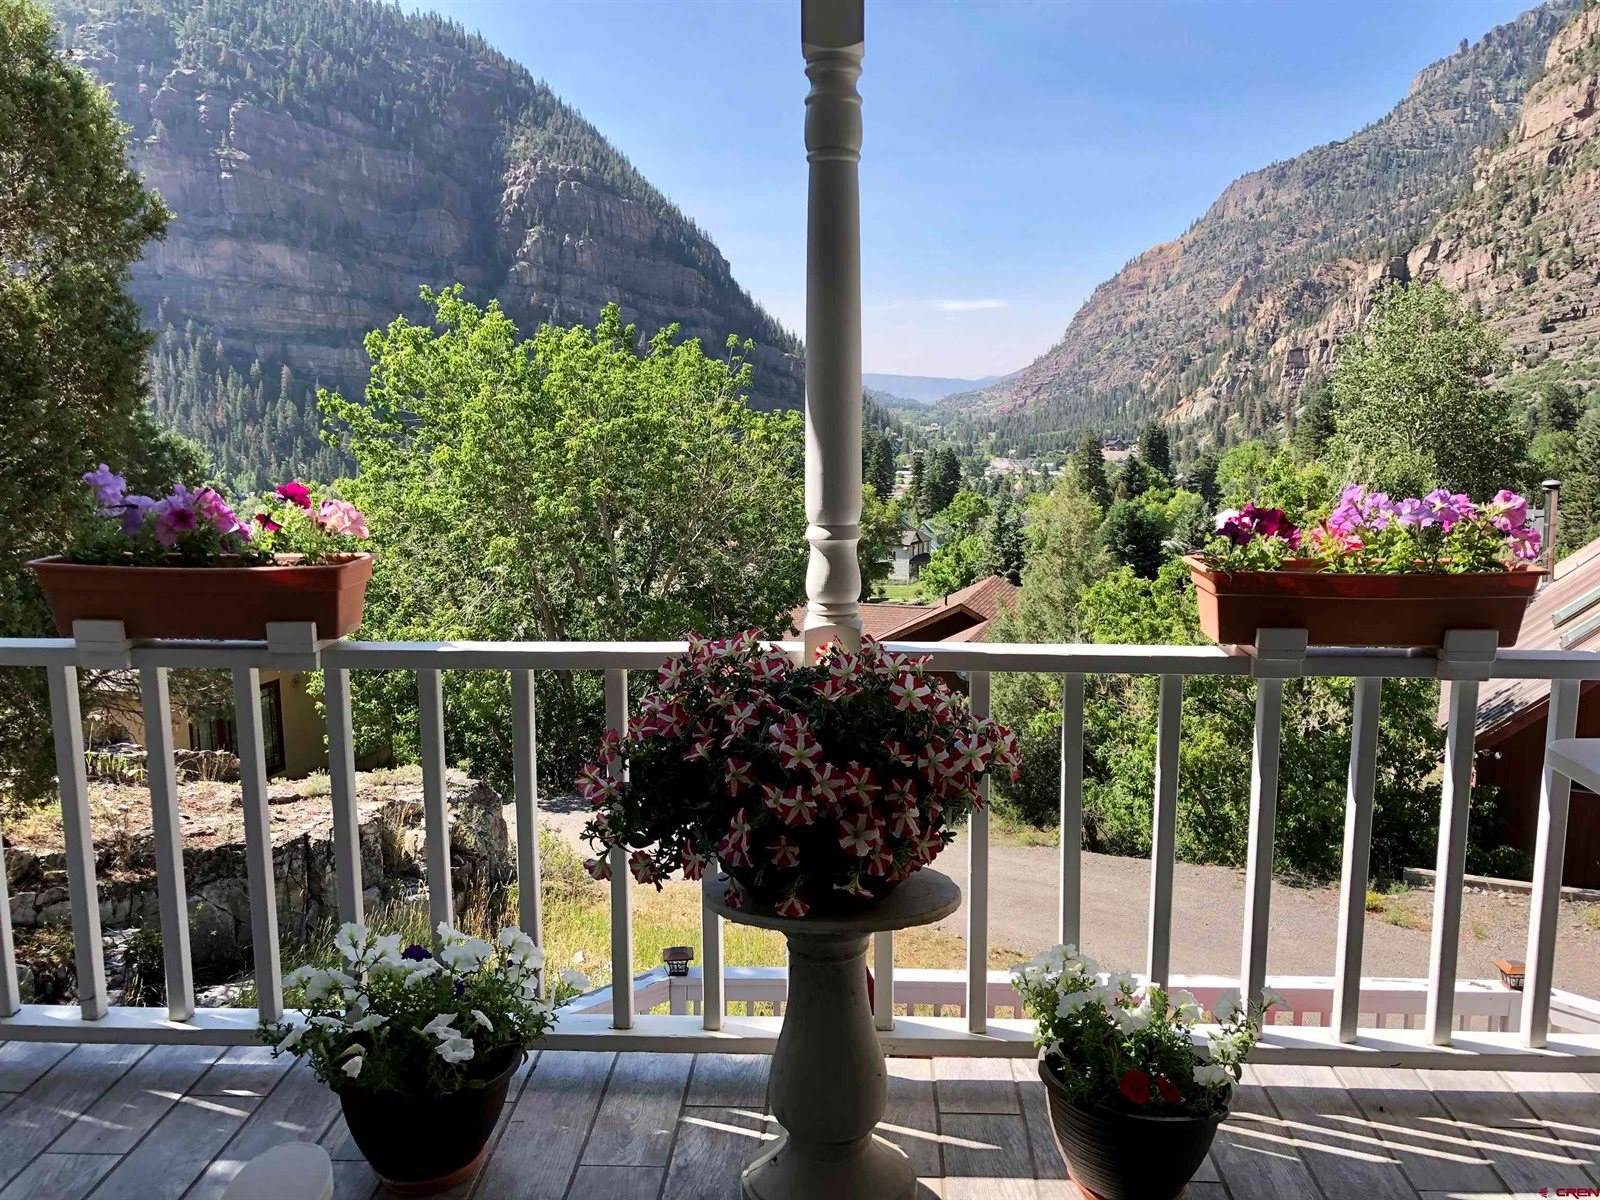 510 2nd Avenue, Ouray, CO 81427